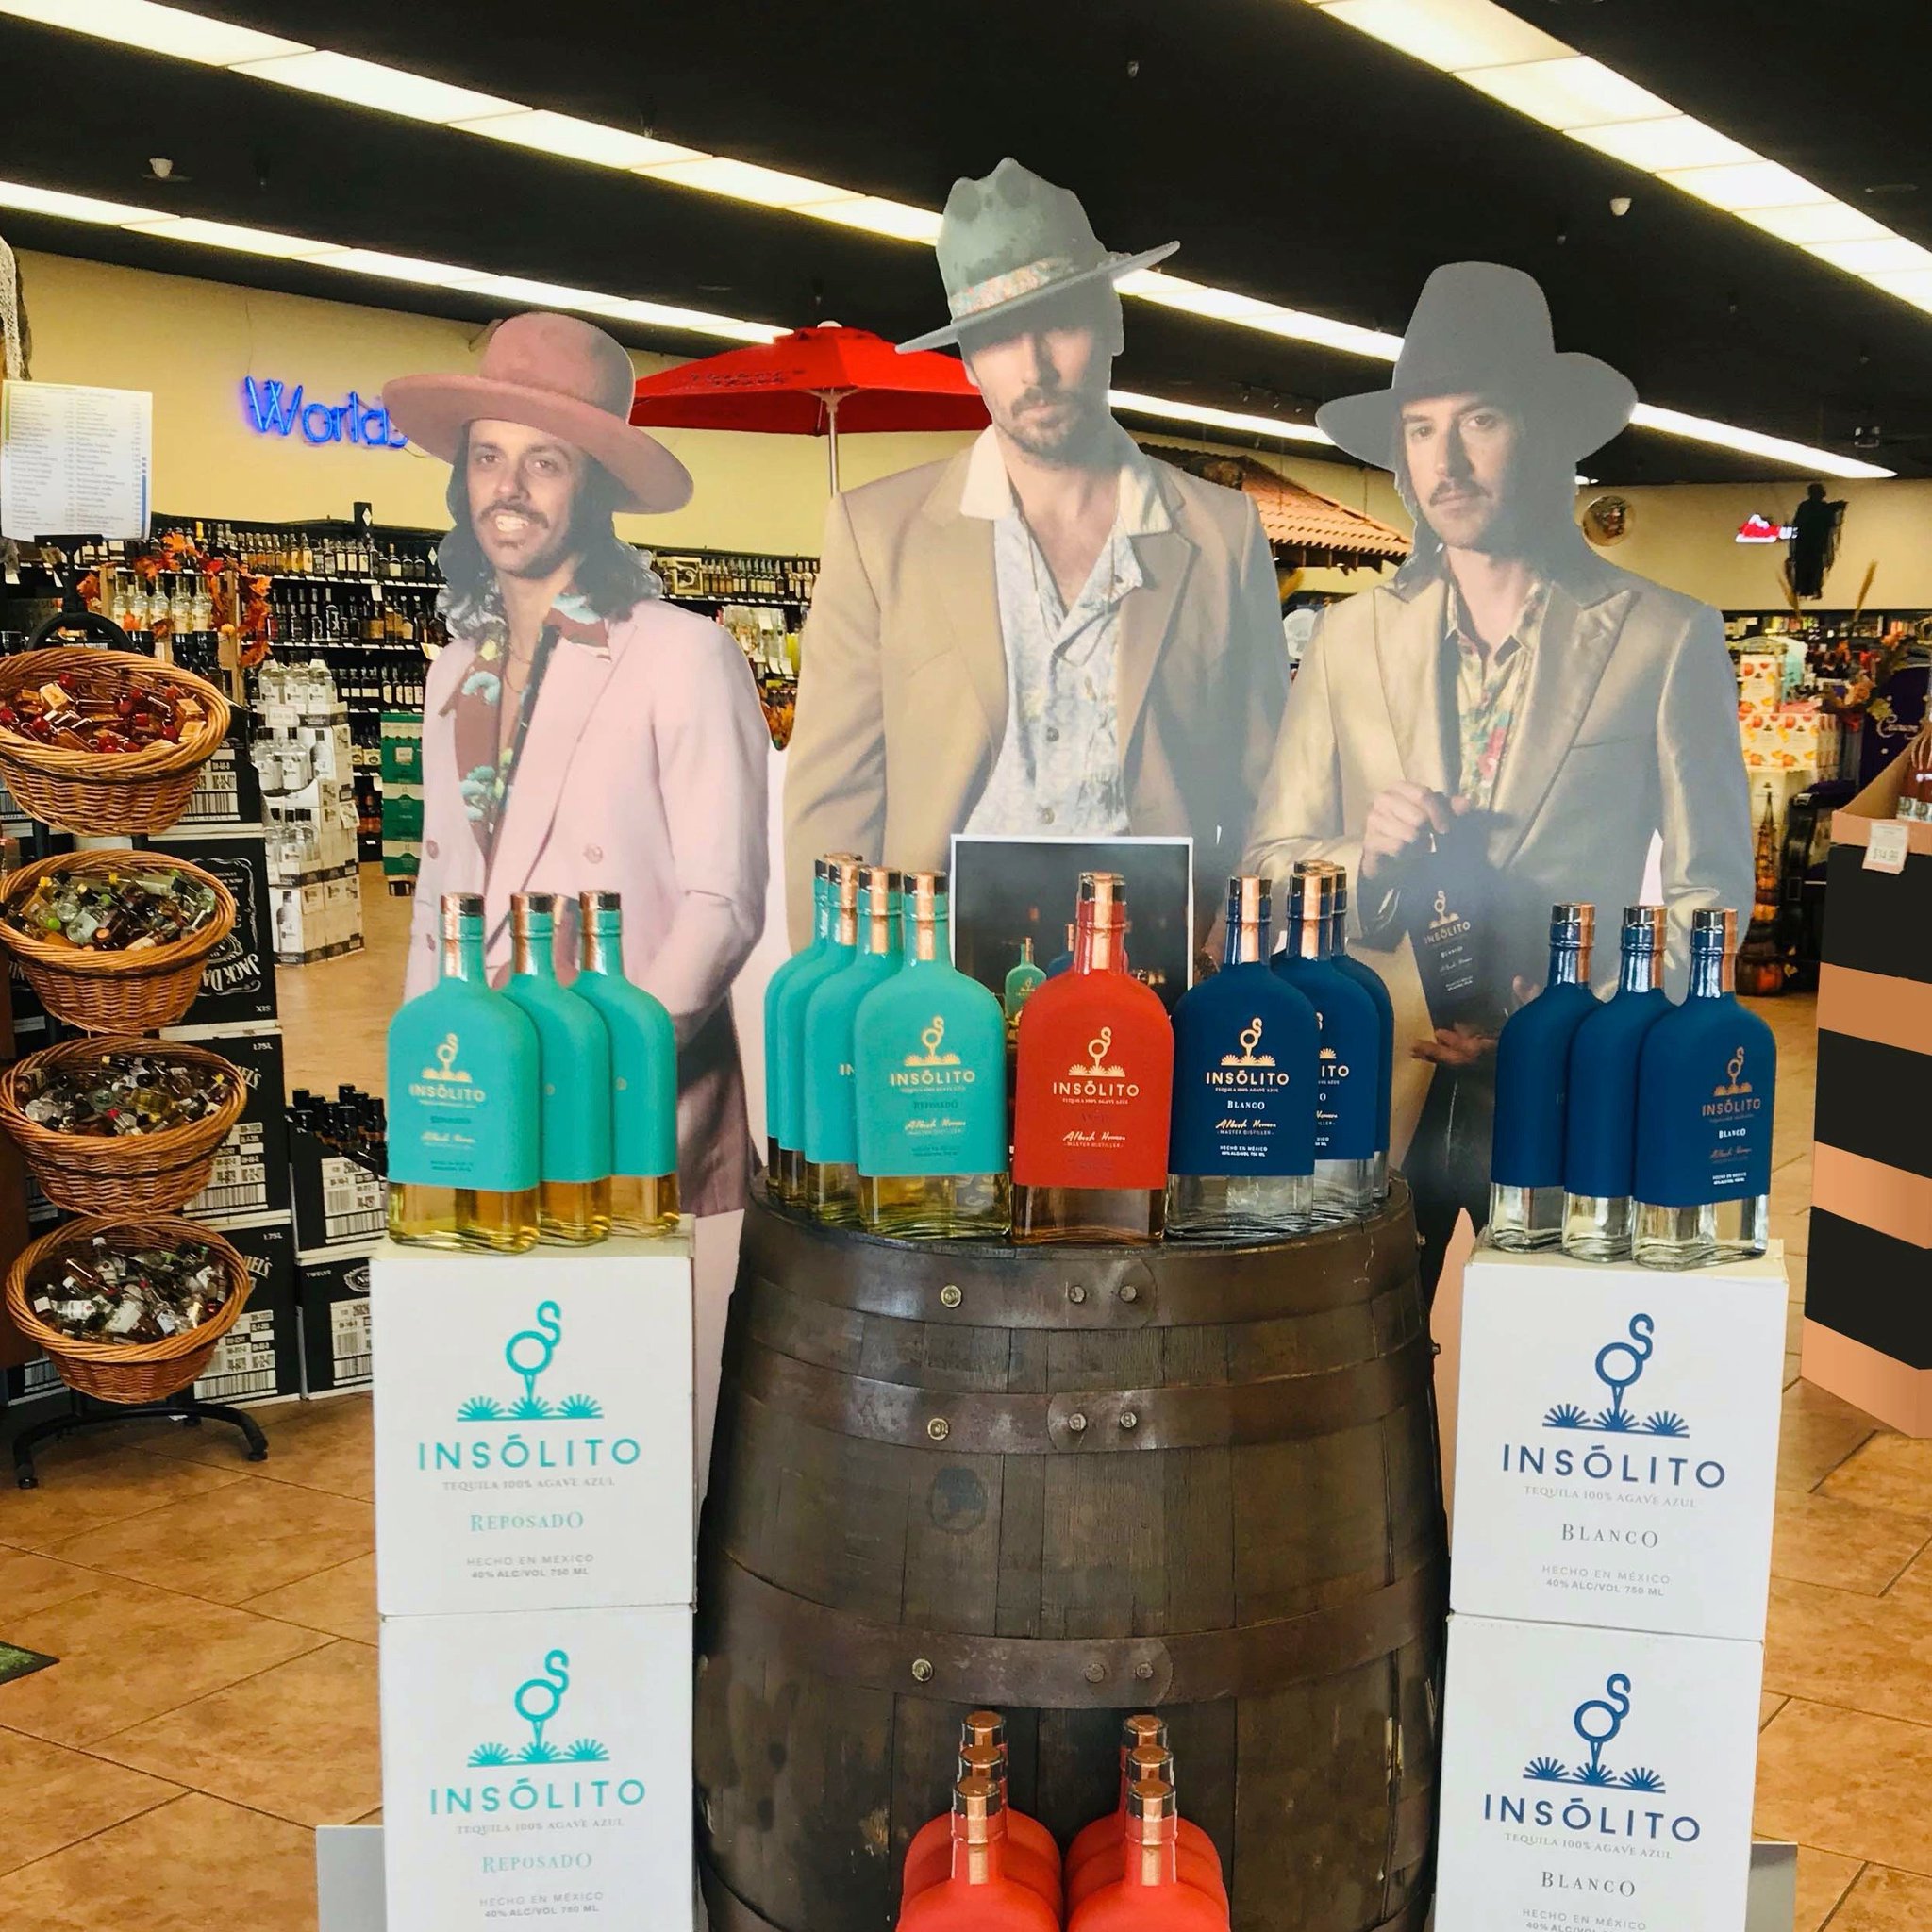 Midland on X: "Three amigos. Three tequilas. Dallas, you can head on over to Sigel's on Greenville and pick up all three bottles of our Insolito tequila. Happy Friday y'all 🦩🦩🦩 https://t.co/2UyH374xjZ